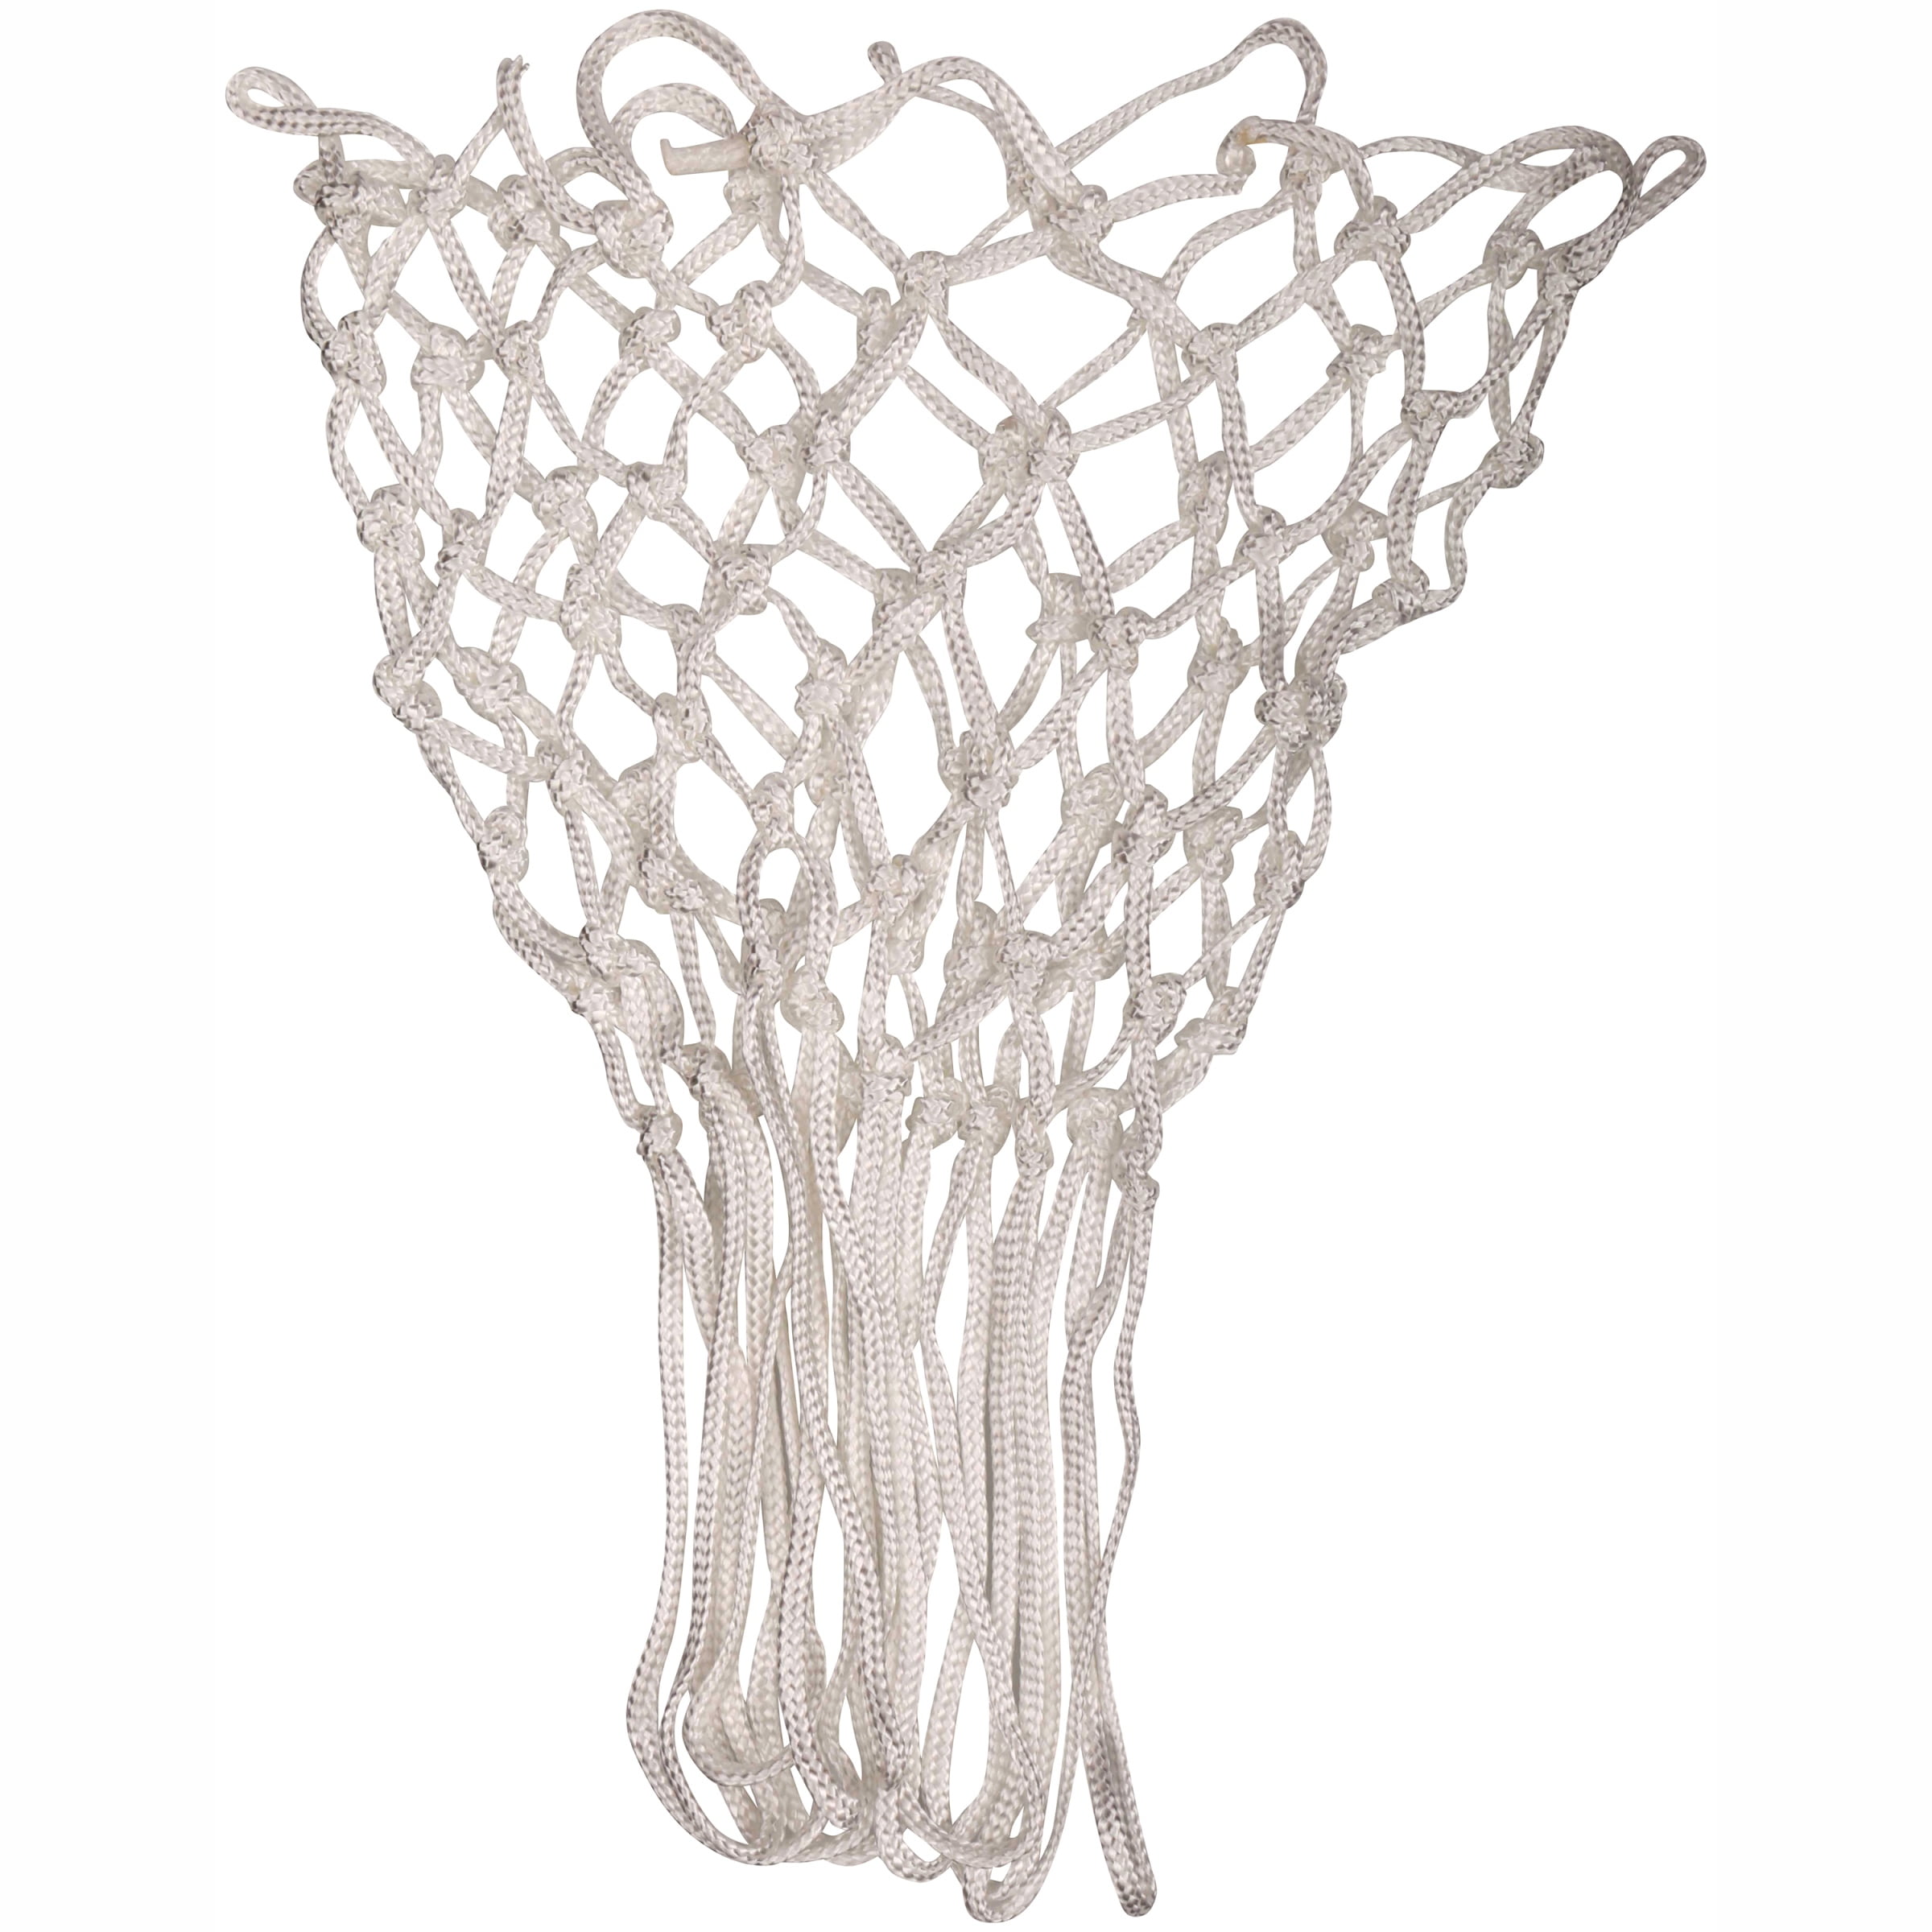 Details about   PROFESSIONAL HEAVY DUTY BASKETBALL NET 19 INCH WIRE DIAMETER 